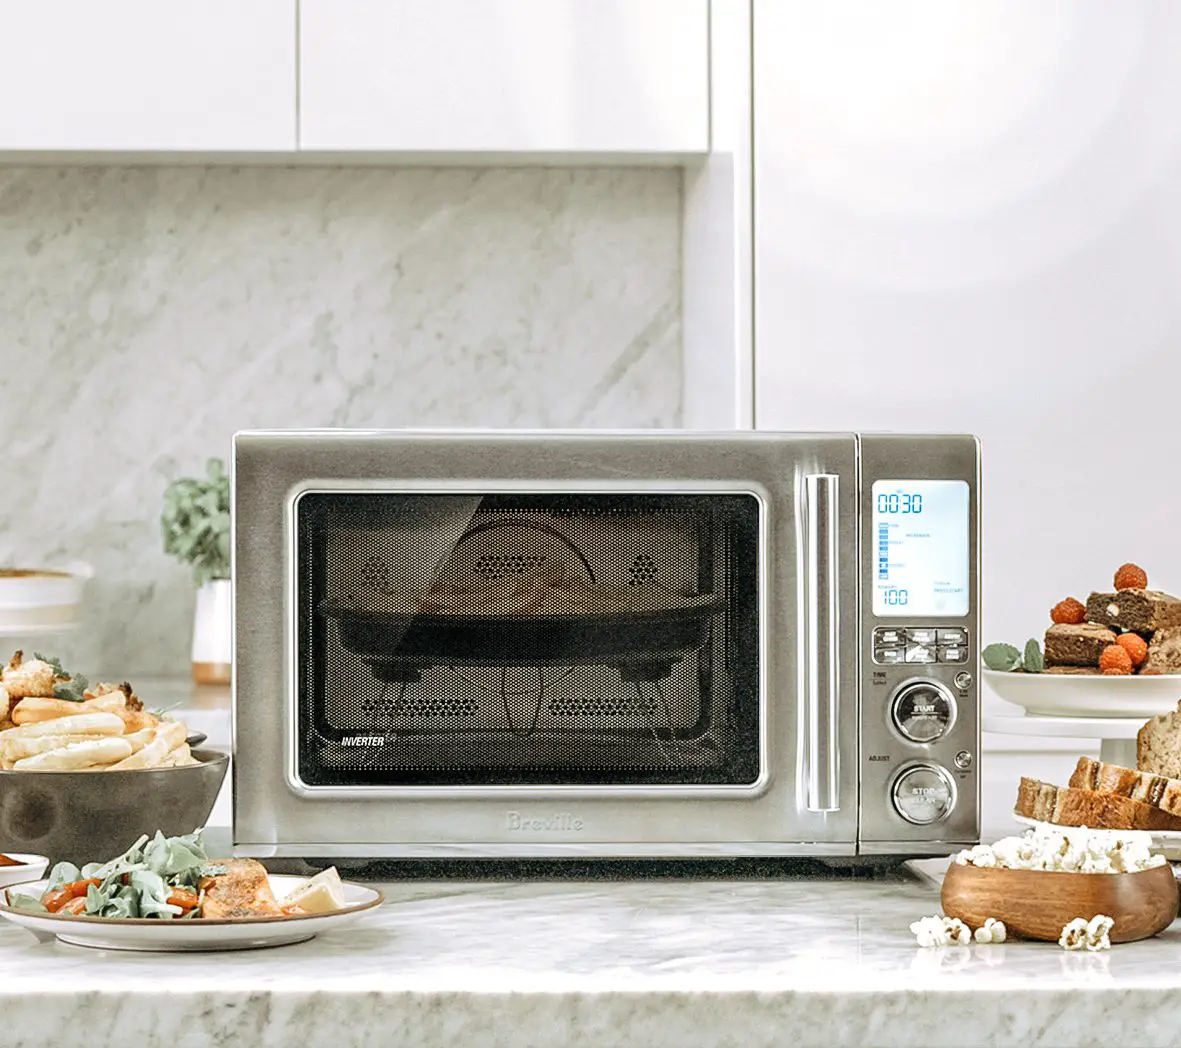 A Microwave, an Air Fryer and a Convection Oven all